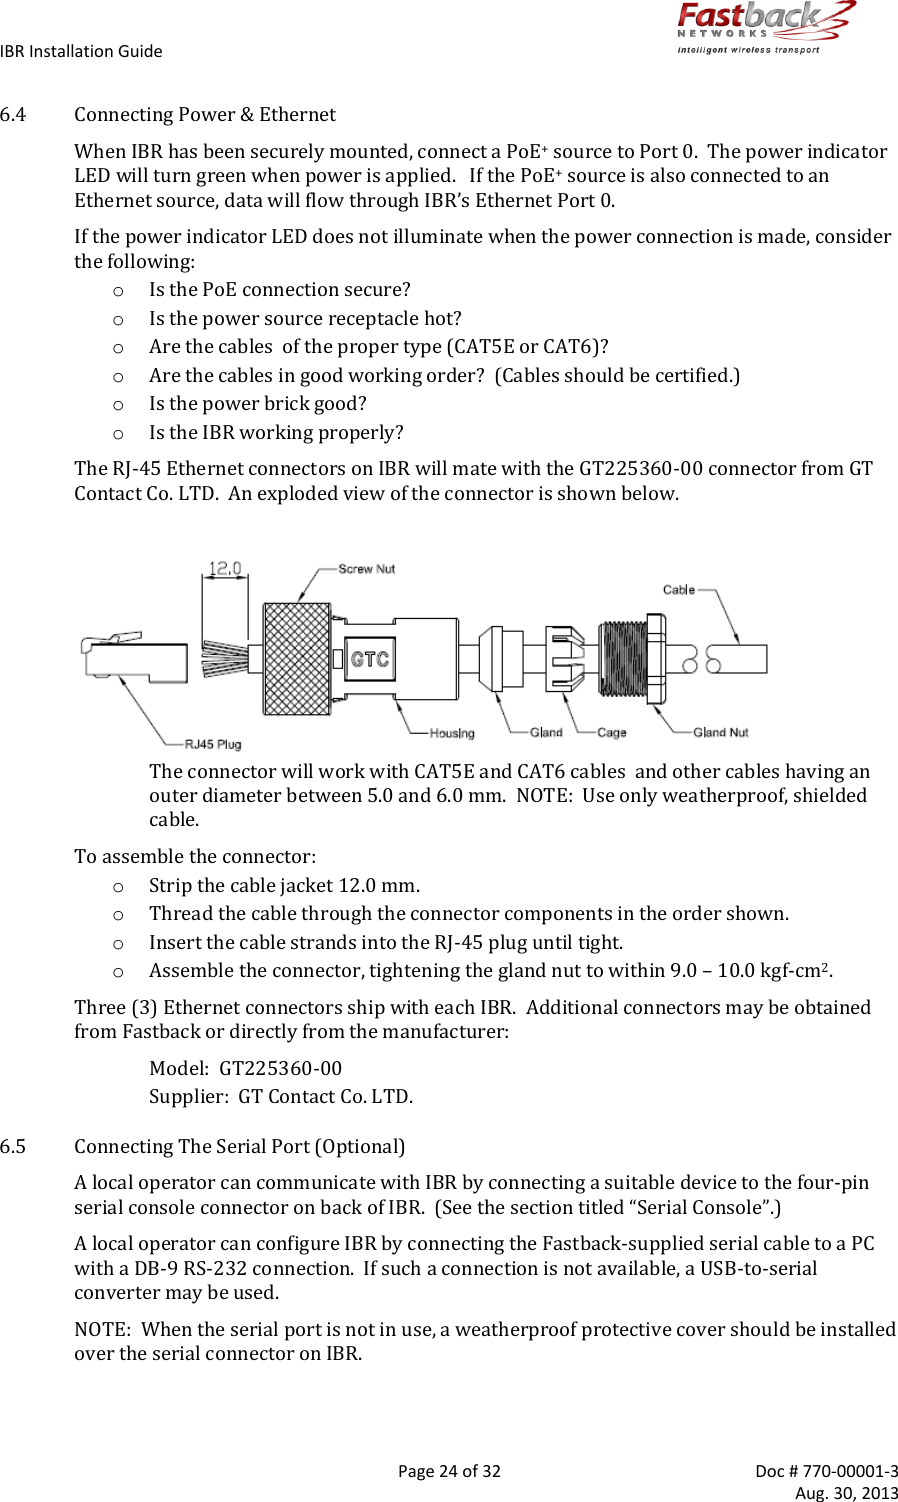 IBR Installation Guide        Page 24 of 32  Doc # 770-00001-3     Aug. 30, 2013   6.4 Connecting Power &amp; Ethernet When IBR has been securely mounted, connect a PoE+ source to Port 0.  The power indicator LED will turn green when power is applied.   If the PoE+ source is also connected to an Ethernet source, data will flow through IBR’s Ethernet Port 0. If the power indicator LED does not illuminate when the power connection is made, consider the following: o Is the PoE connection secure? o Is the power source receptacle hot? o Are the cables  of the proper type (CAT5E or CAT6)? o Are the cables in good working order?  (Cables should be certified.) o Is the power brick good? o Is the IBR working properly? The RJ-45 Ethernet connectors on IBR will mate with the GT225360-00 connector from GT Contact Co. LTD.  An exploded view of the connector is shown below.   The connector will work with CAT5E and CAT6 cables  and other cables having an outer diameter between 5.0 and 6.0 mm.  NOTE:  Use only weatherproof, shielded cable. To assemble the connector: o Strip the cable jacket 12.0 mm. o Thread the cable through the connector components in the order shown. o Insert the cable strands into the RJ-45 plug until tight. o Assemble the connector, tightening the gland nut to within 9.0 – 10.0 kgf-cm2. Three (3) Ethernet connectors ship with each IBR.  Additional connectors may be obtained from Fastback or directly from the manufacturer: Model:  GT225360-00  Supplier:  GT Contact Co. LTD.   6.5 Connecting The Serial Port (Optional) A local operator can communicate with IBR by connecting a suitable device to the four-pin serial console connector on back of IBR.  (See the section titled “Serial Console”.) A local operator can configure IBR by connecting the Fastback-supplied serial cable to a PC with a DB-9 RS-232 connection.  If such a connection is not available, a USB-to-serial converter may be used.  NOTE:  When the serial port is not in use, a weatherproof protective cover should be installed over the serial connector on IBR. 